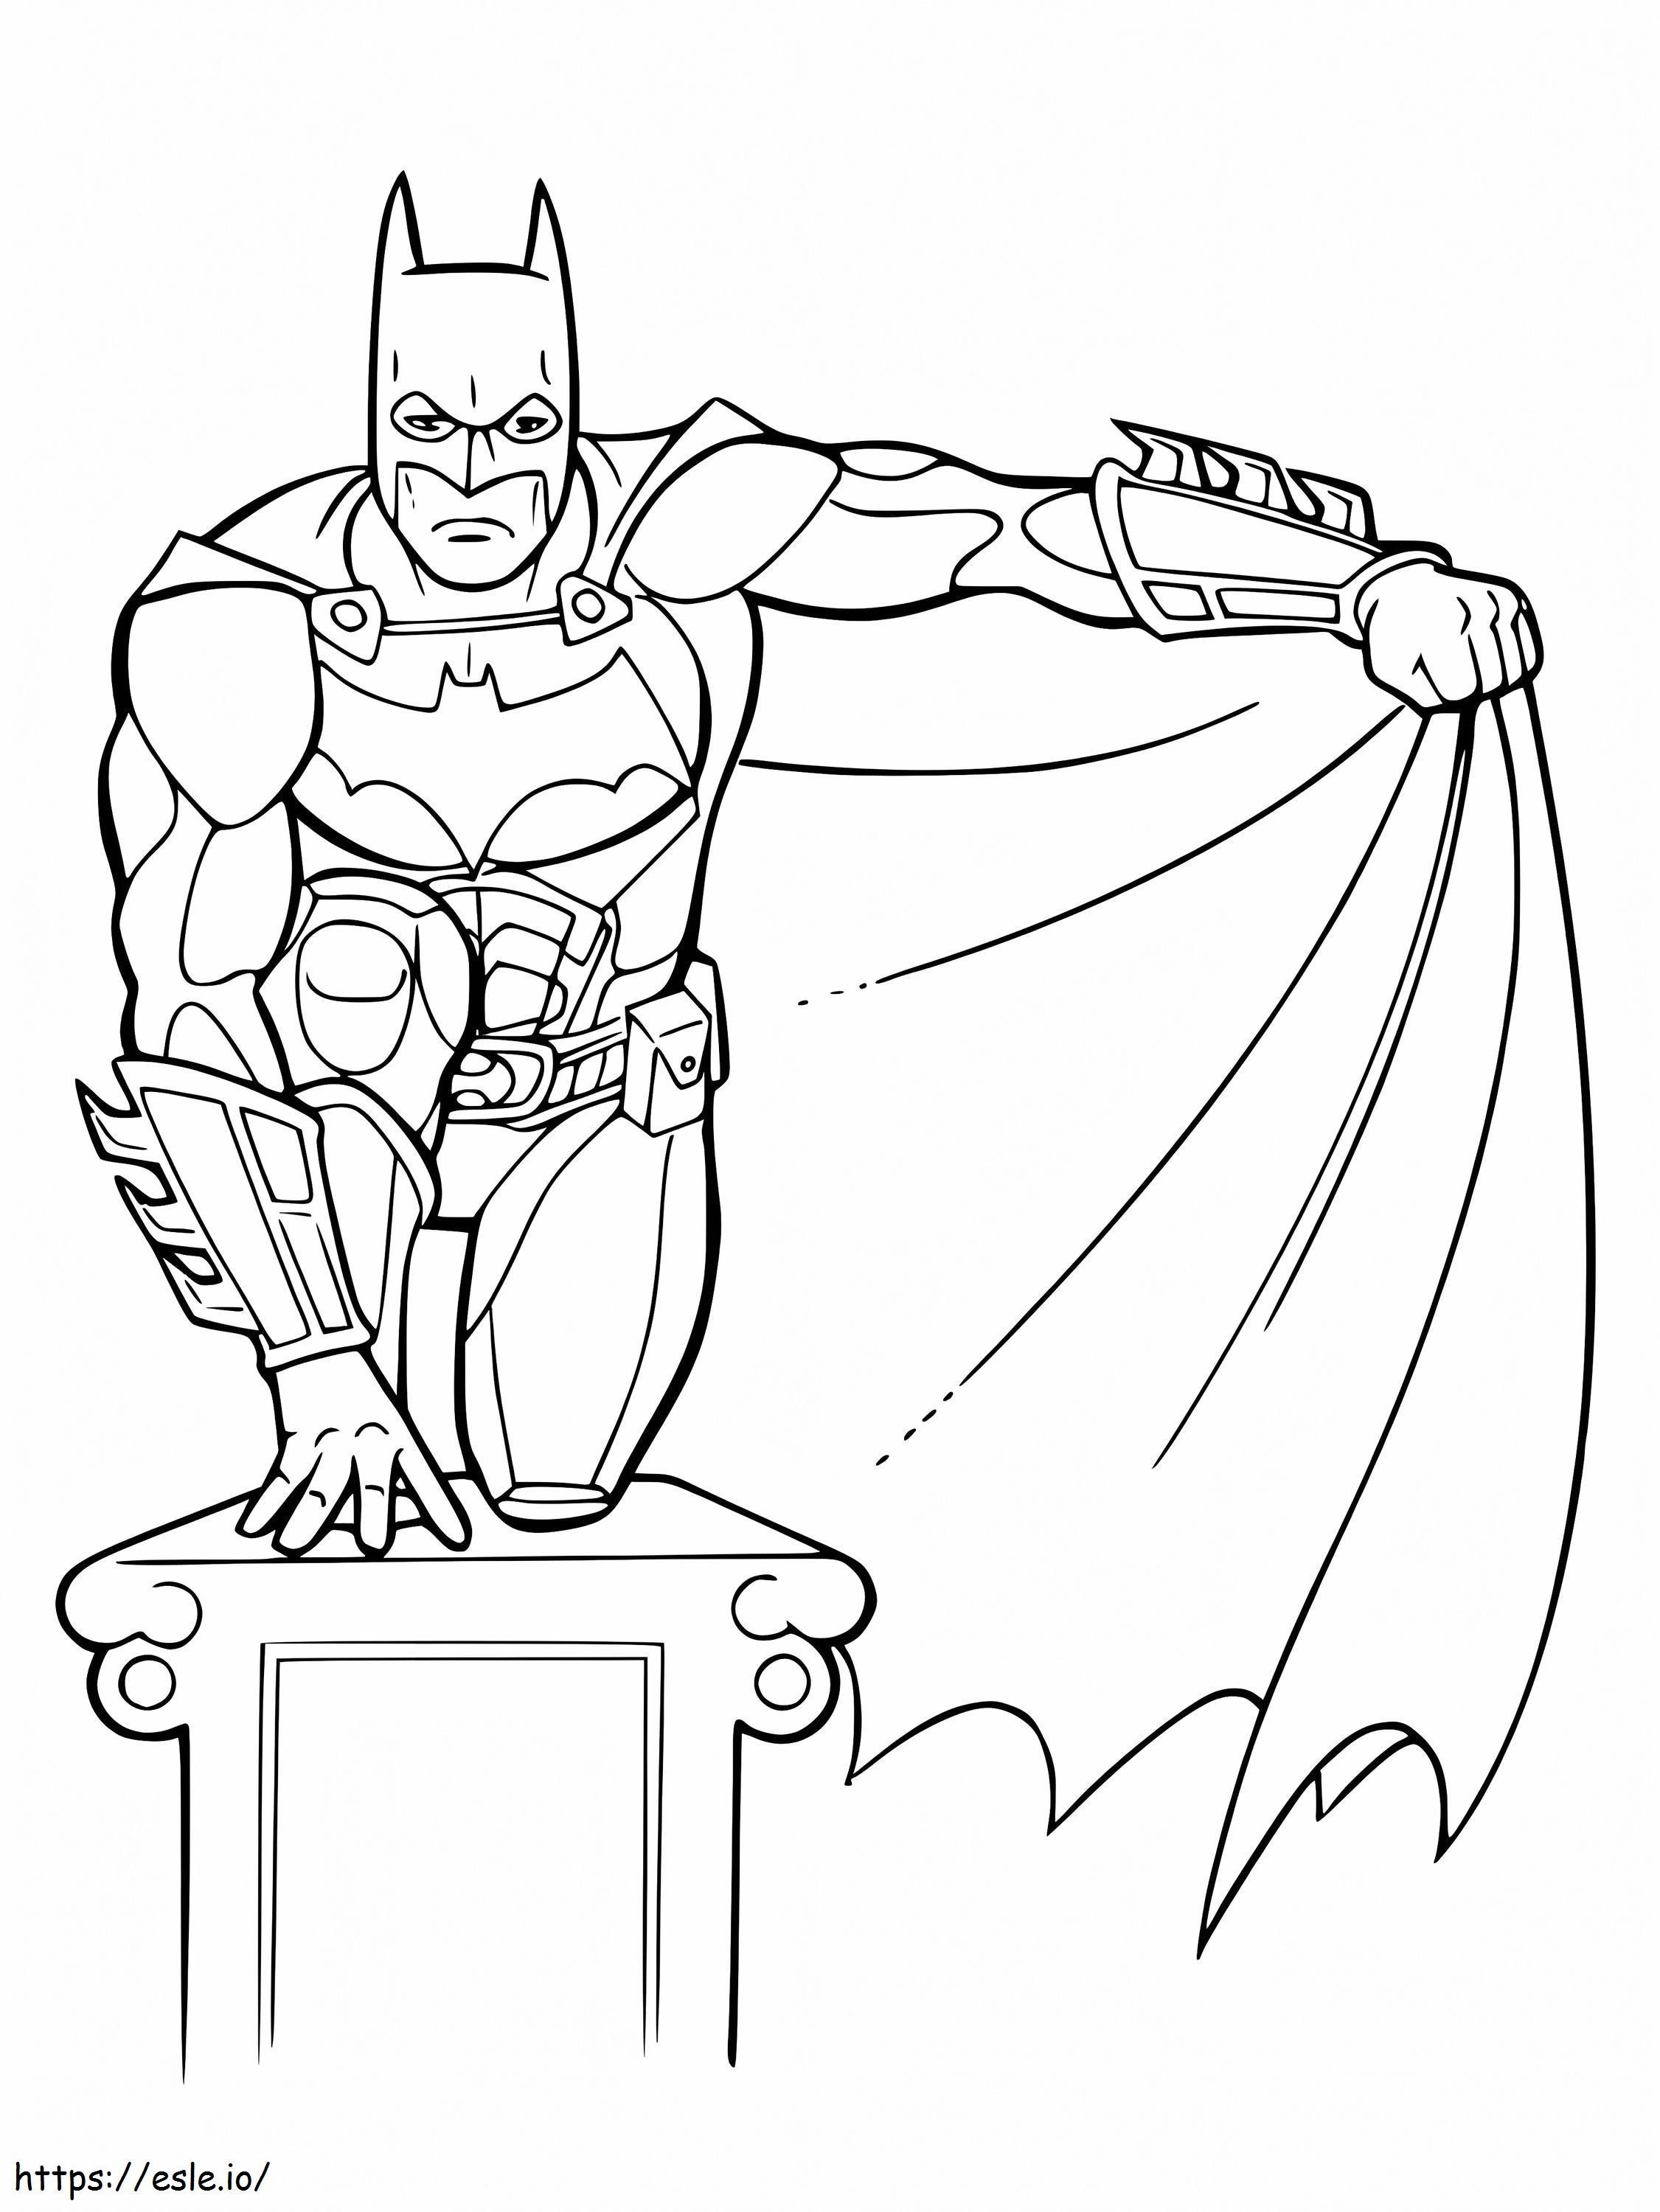 Awesome Batman coloring page